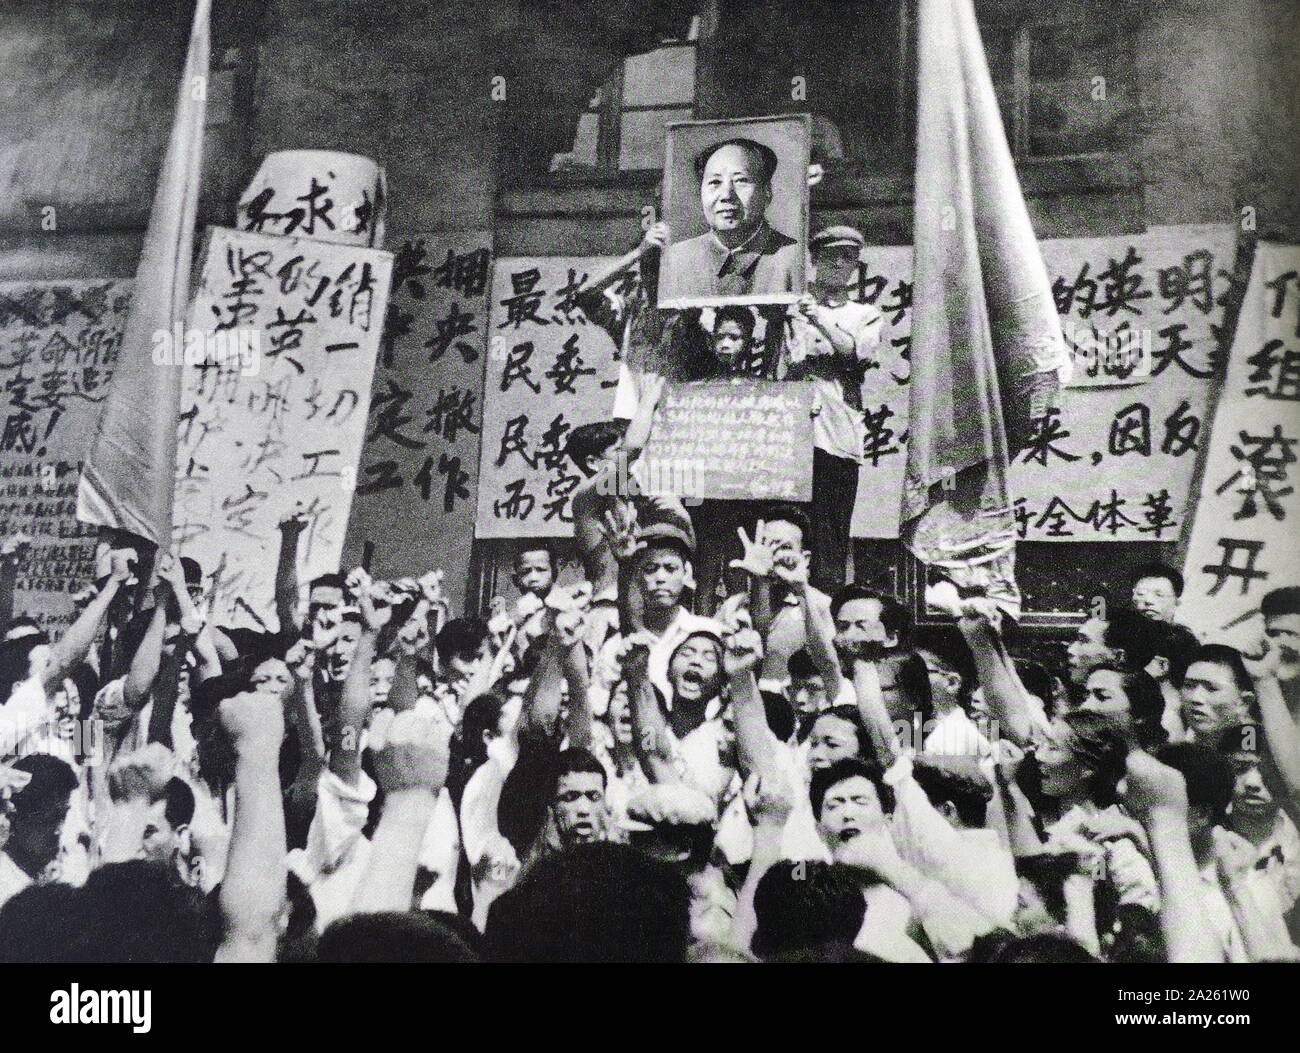 Red Guards China's shout long-live Chairman Mao ! during the Cultural Revolution. China 1967 Stock Photo